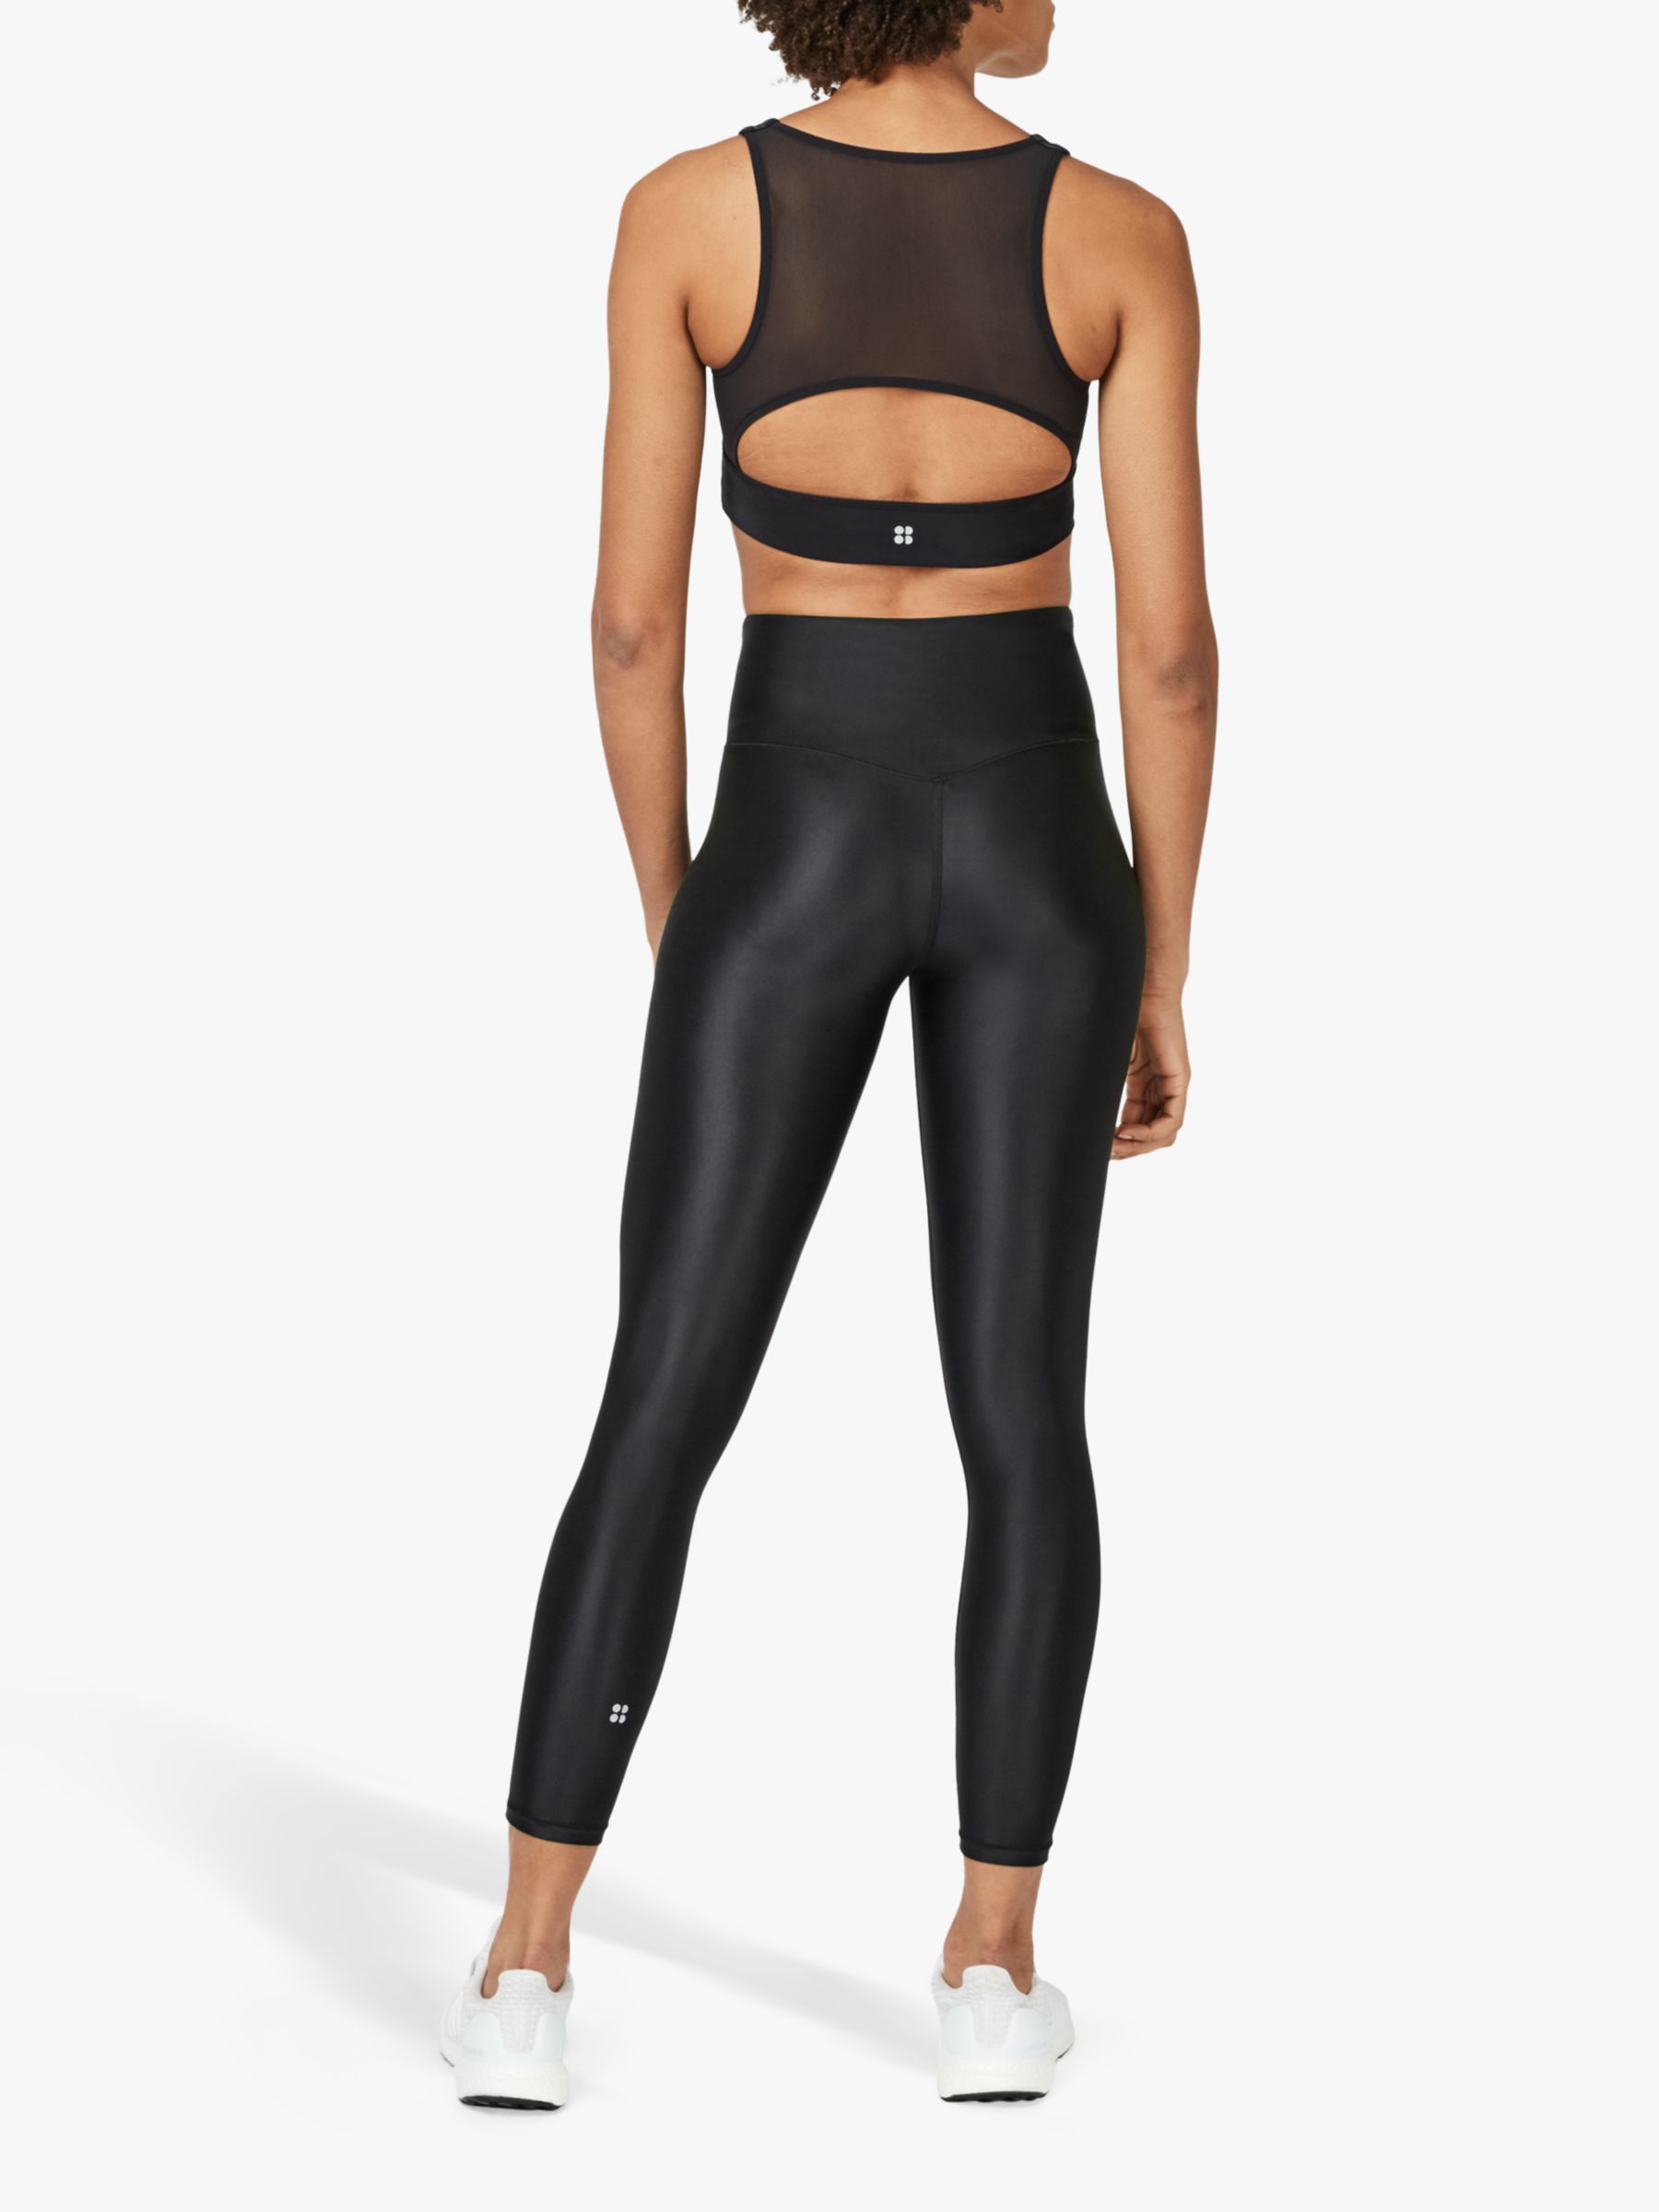 Who manufactures Gymshark and similar branded leggings or workout clothes?  - Quora